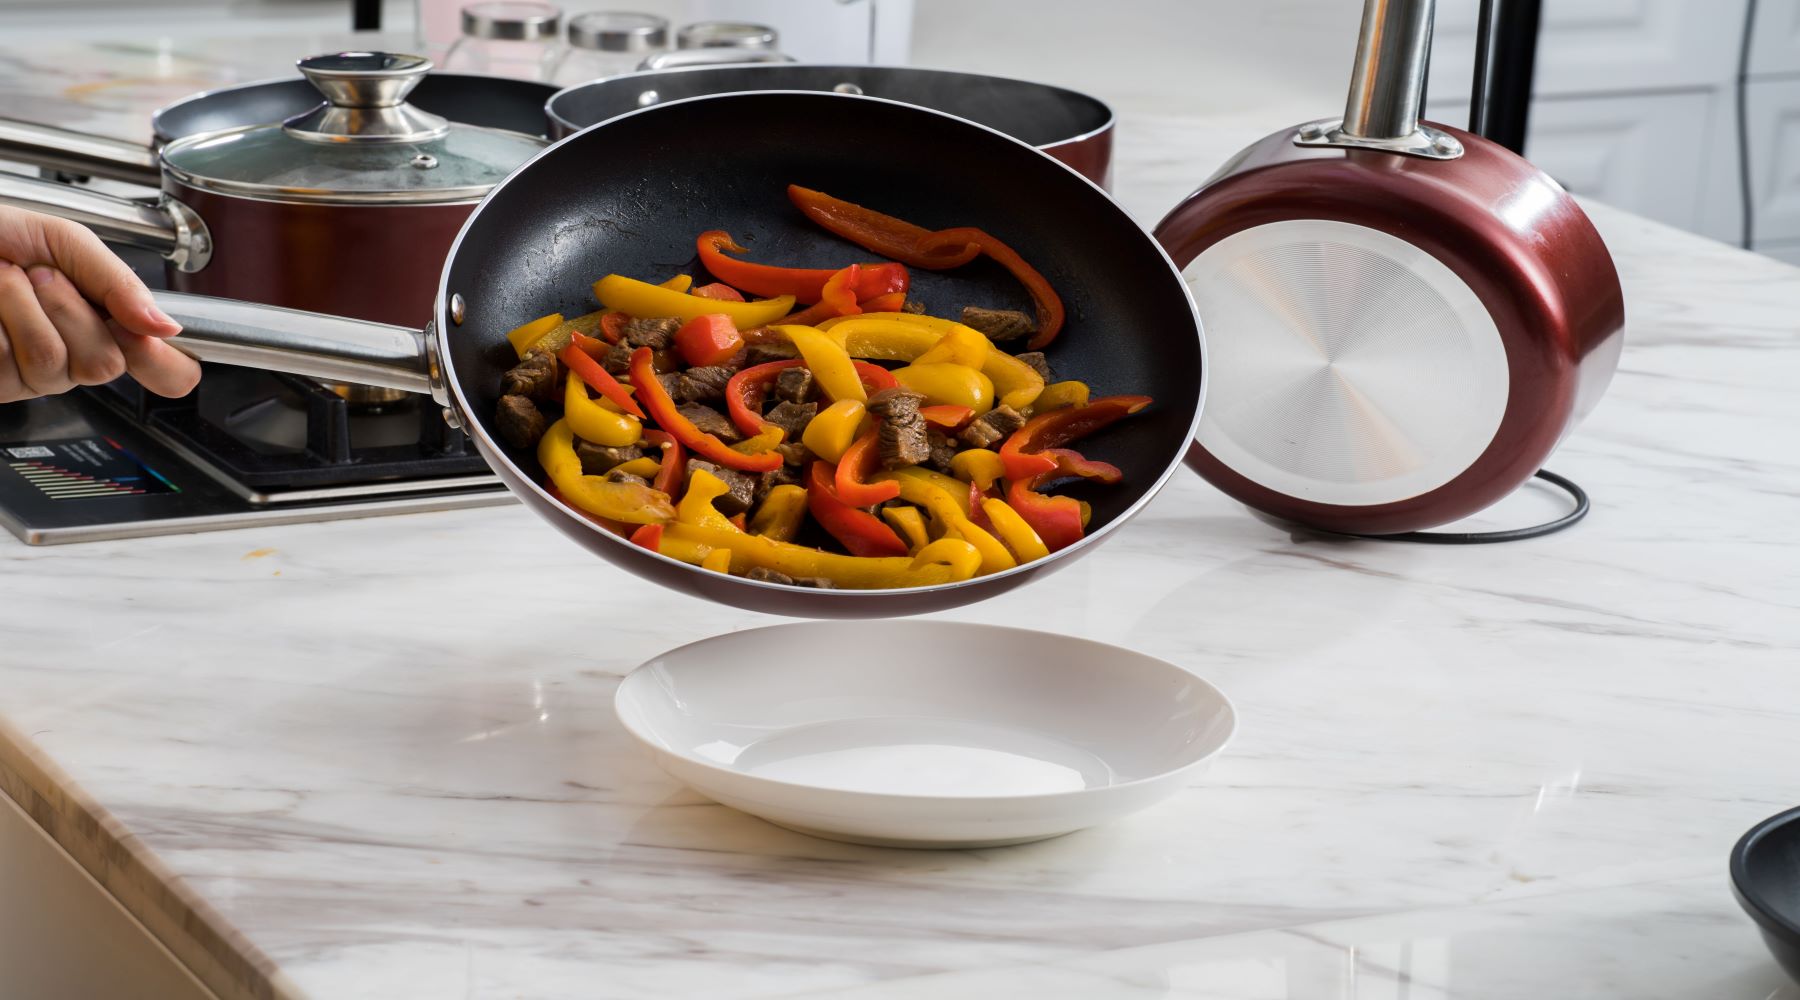 T-Fal A80789 Specialty Nonstick Dishwasher Safe Oven Safe Pfoa-Free Jumbo  Wok Cookware, Delivery Near You